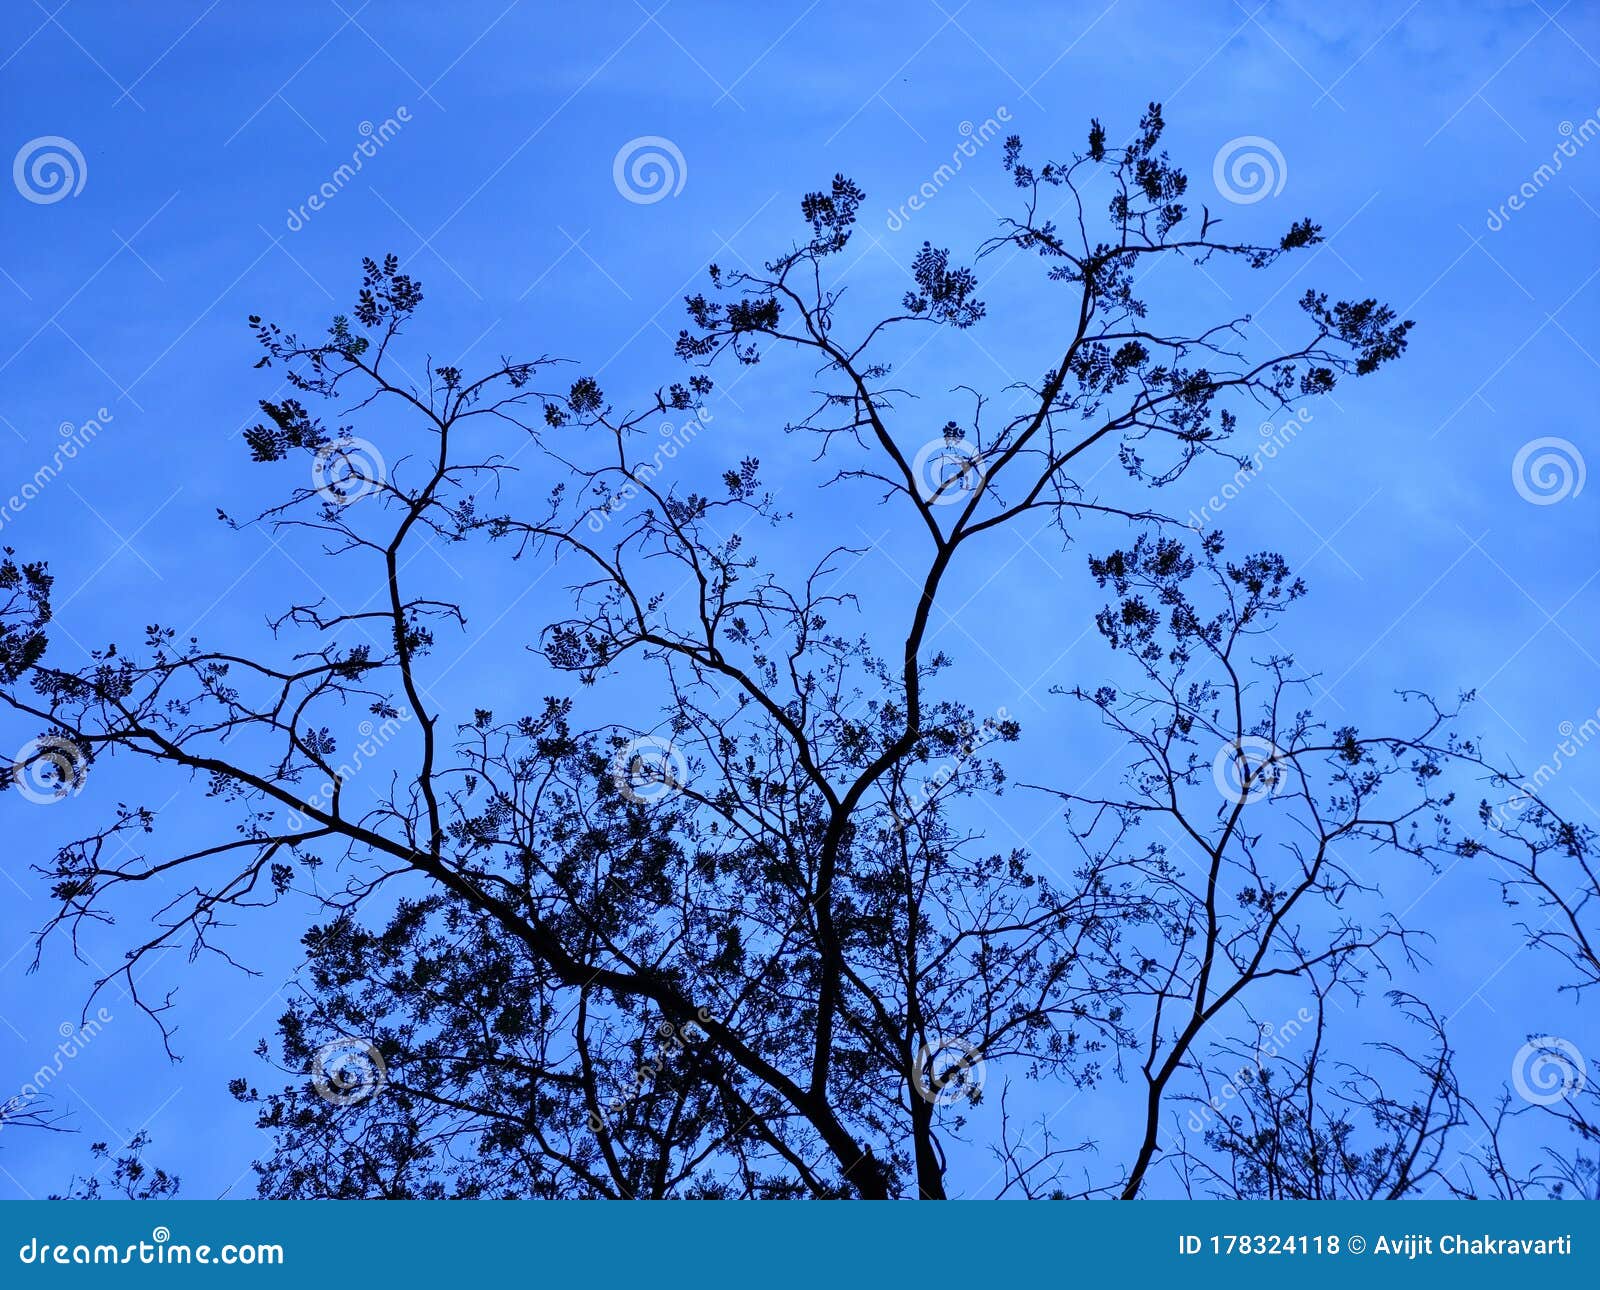 Beautiful Artistic Distribution of Tree Branches with a Blue Sky in